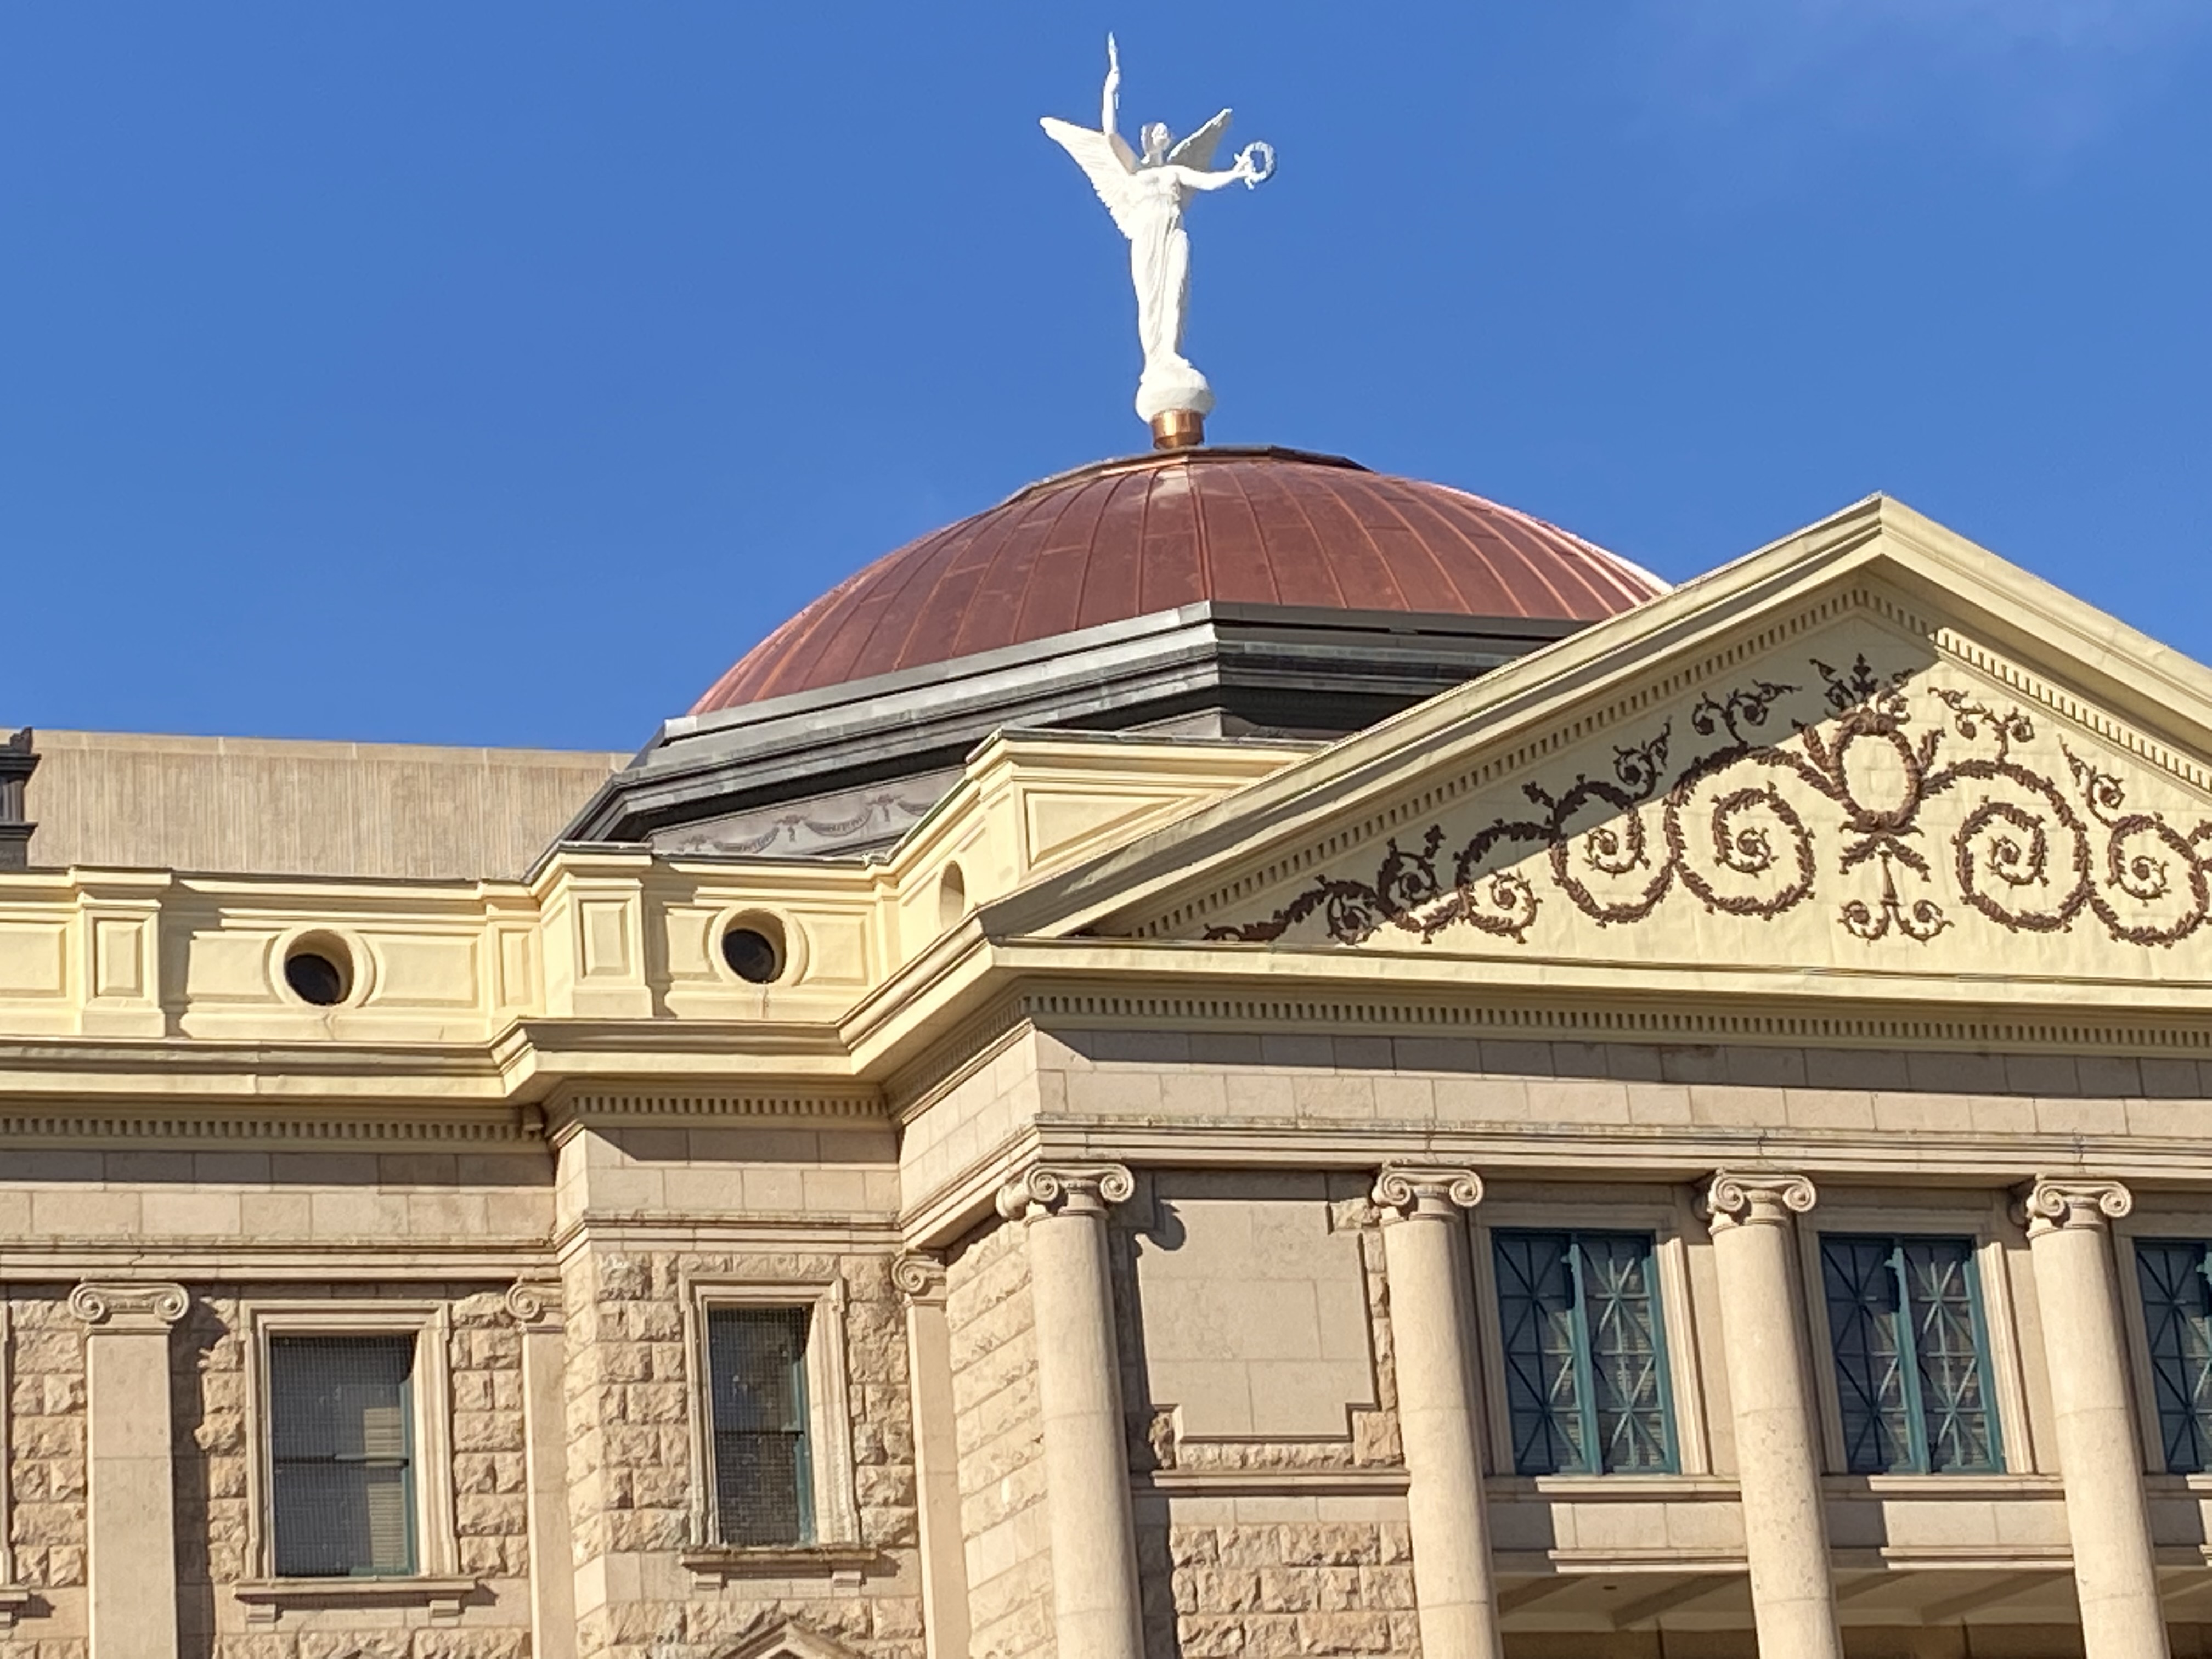 The copper dome atop the historic Arizona State Capitol building was replaced to restore it to its glistening grandeur.